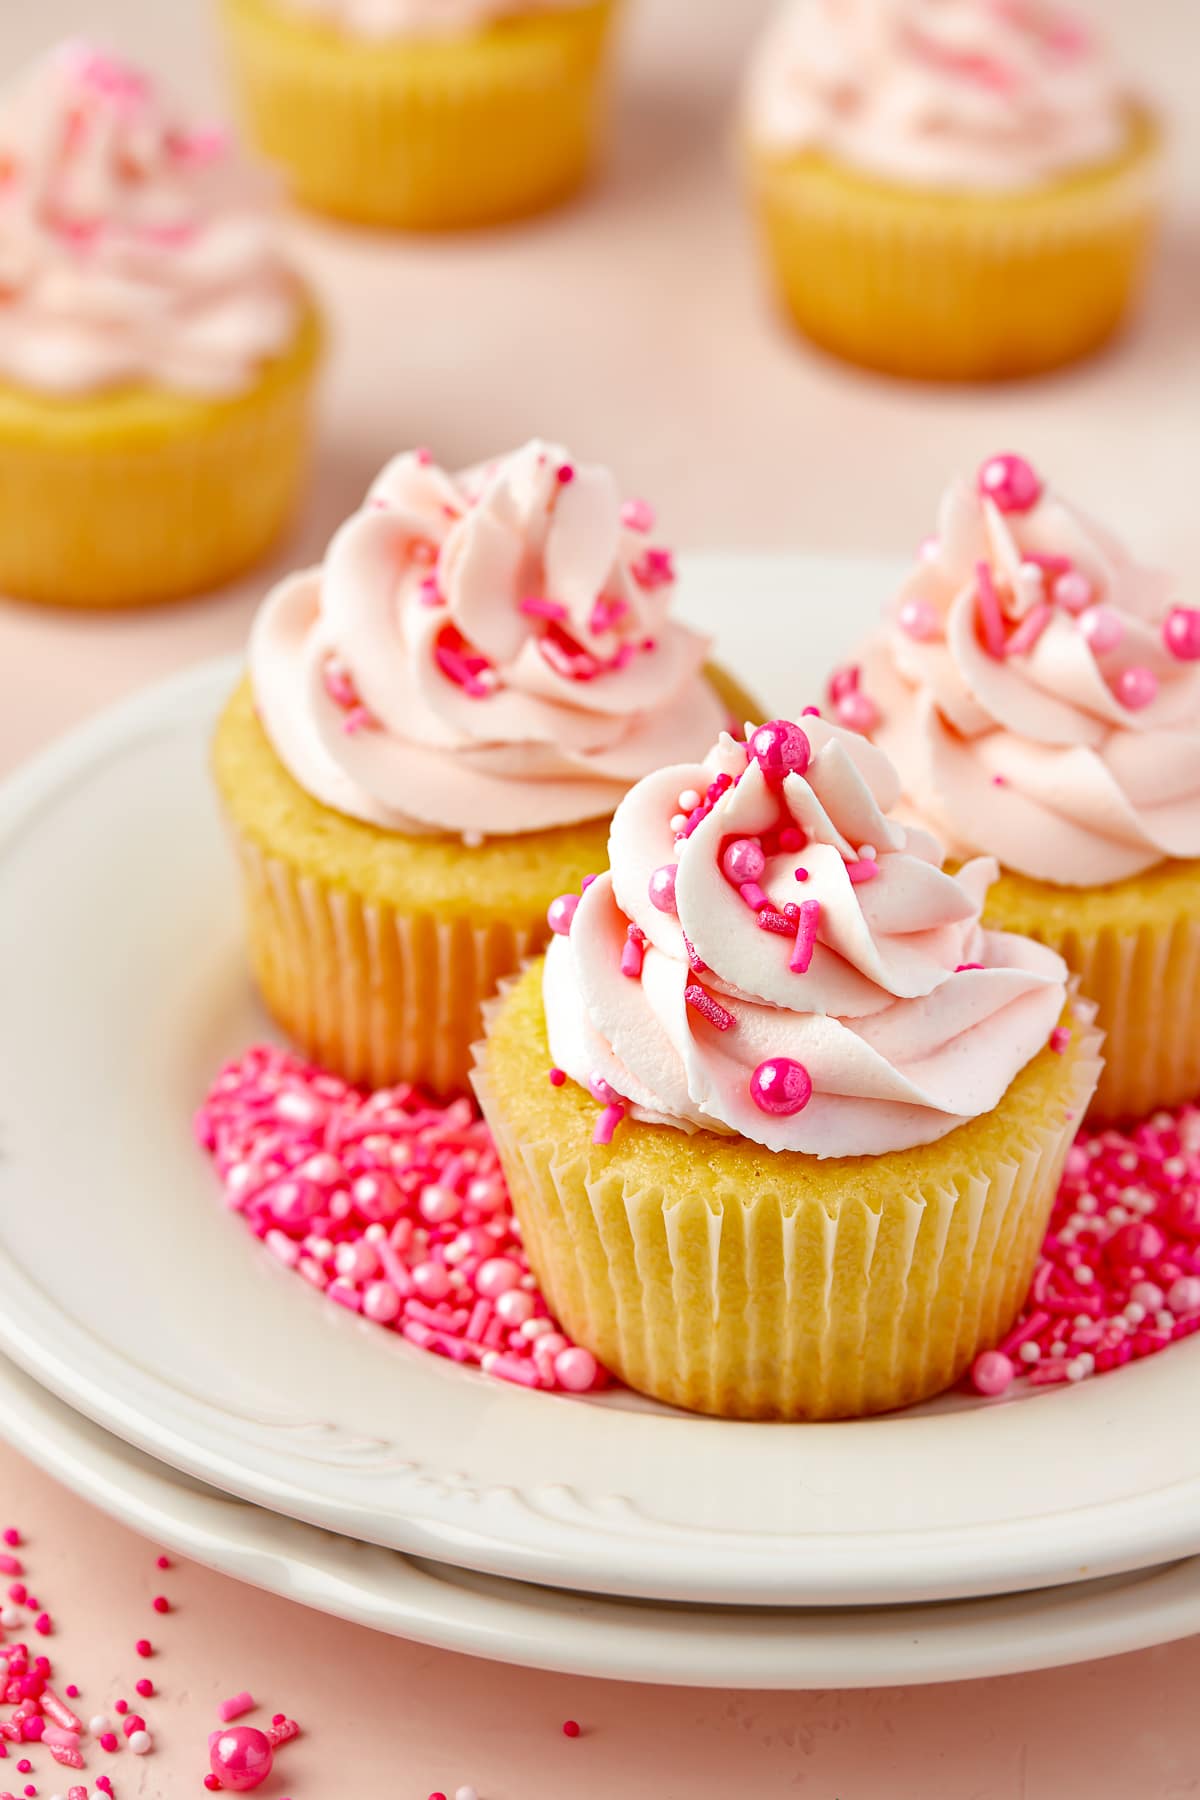 Three Valentine's Day Cupcakes sitting on a white plate with pink sprinkles scattered around on a pink tabletop. Pink frosting and pink sprinkles on the cupcakes